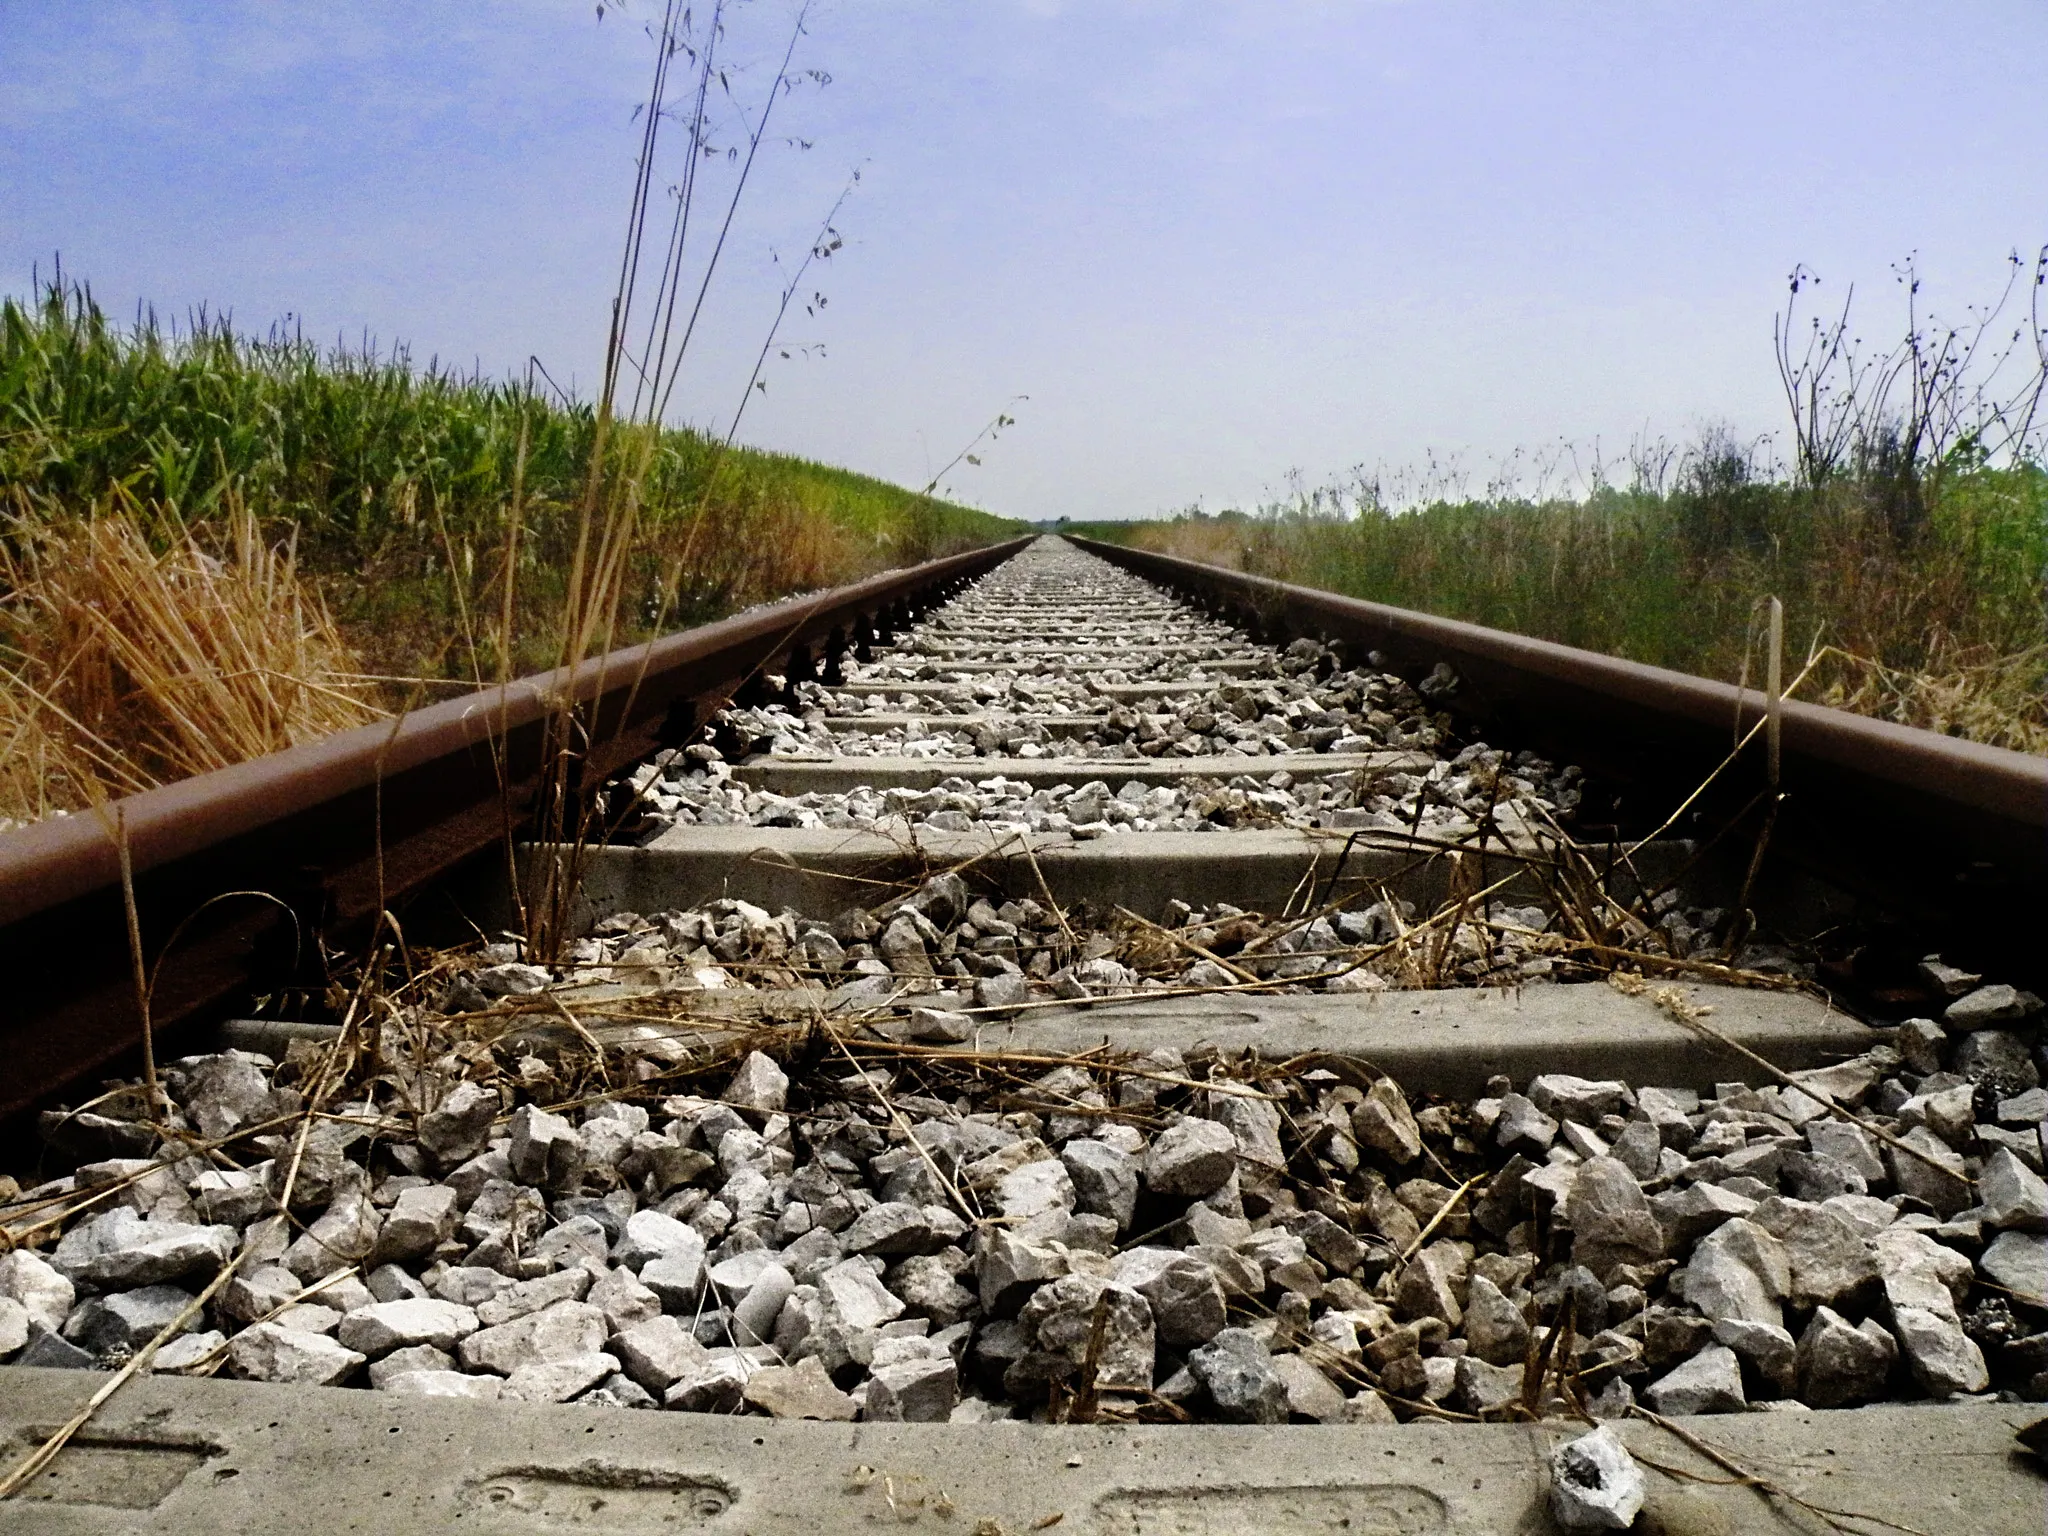 Photo showing: 500px provided description: An abandoned railway in the middle of the Po valley, in Italy.

Post-processed with GIMP. [#stones ,#train ,#railway ,#wheat ,#country ,#crops]